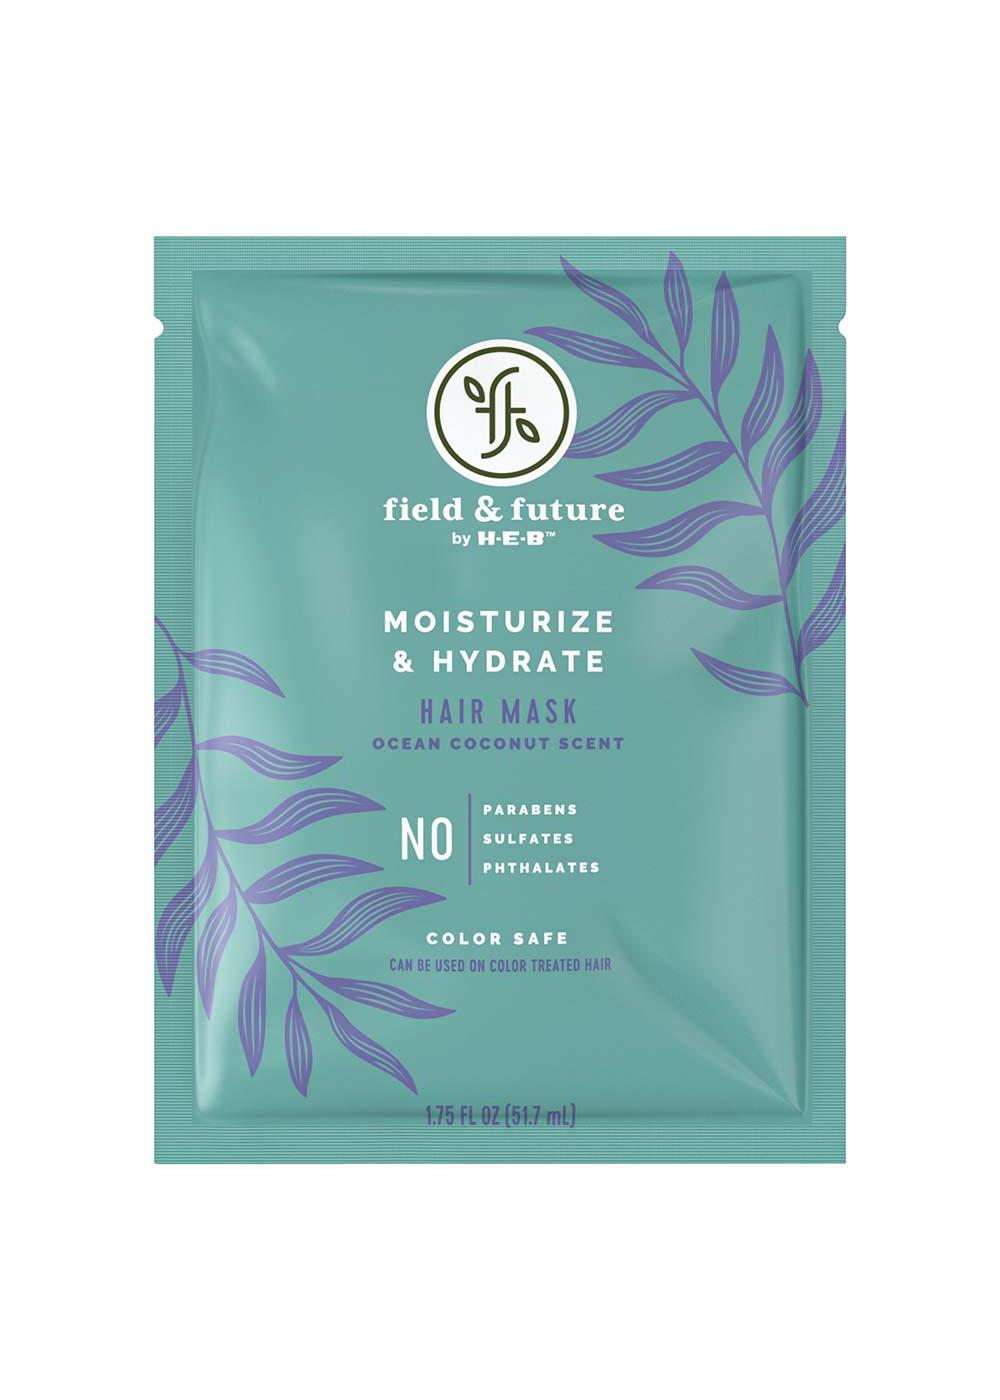 Field & Future by H-E-B Moisturize & Hydrate Hair Mask - Ocean Coconut; image 1 of 5